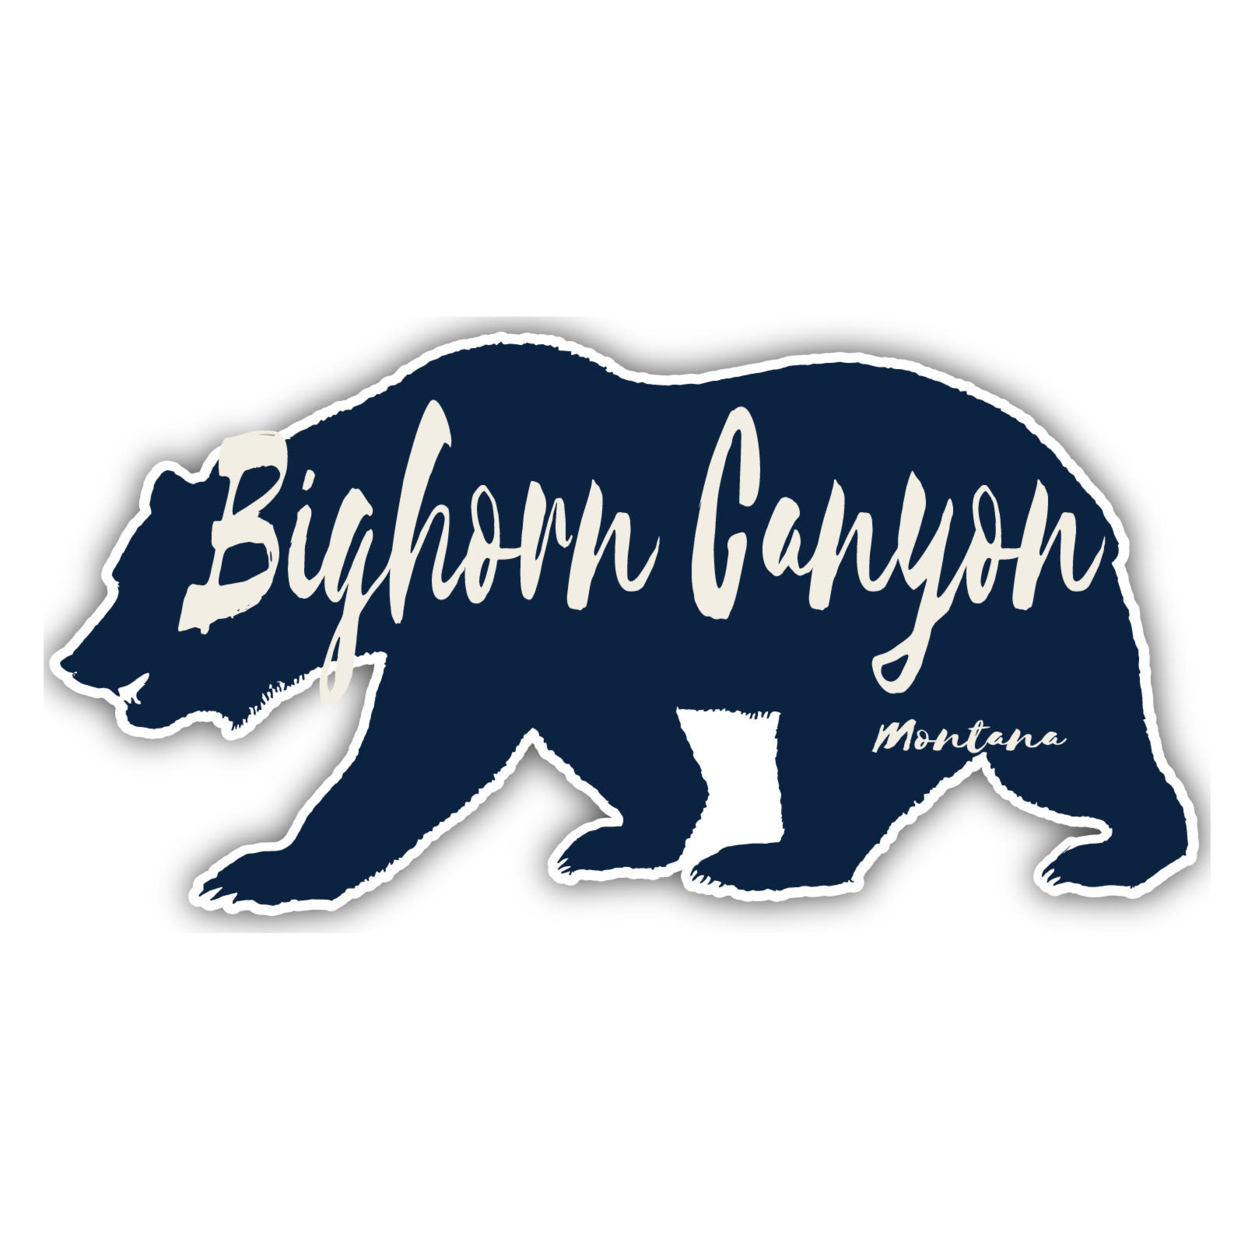 Bighorn Canyon Montana Souvenir Decorative Stickers (Choose Theme And Size) - 4-Pack, 6-Inch, Bear